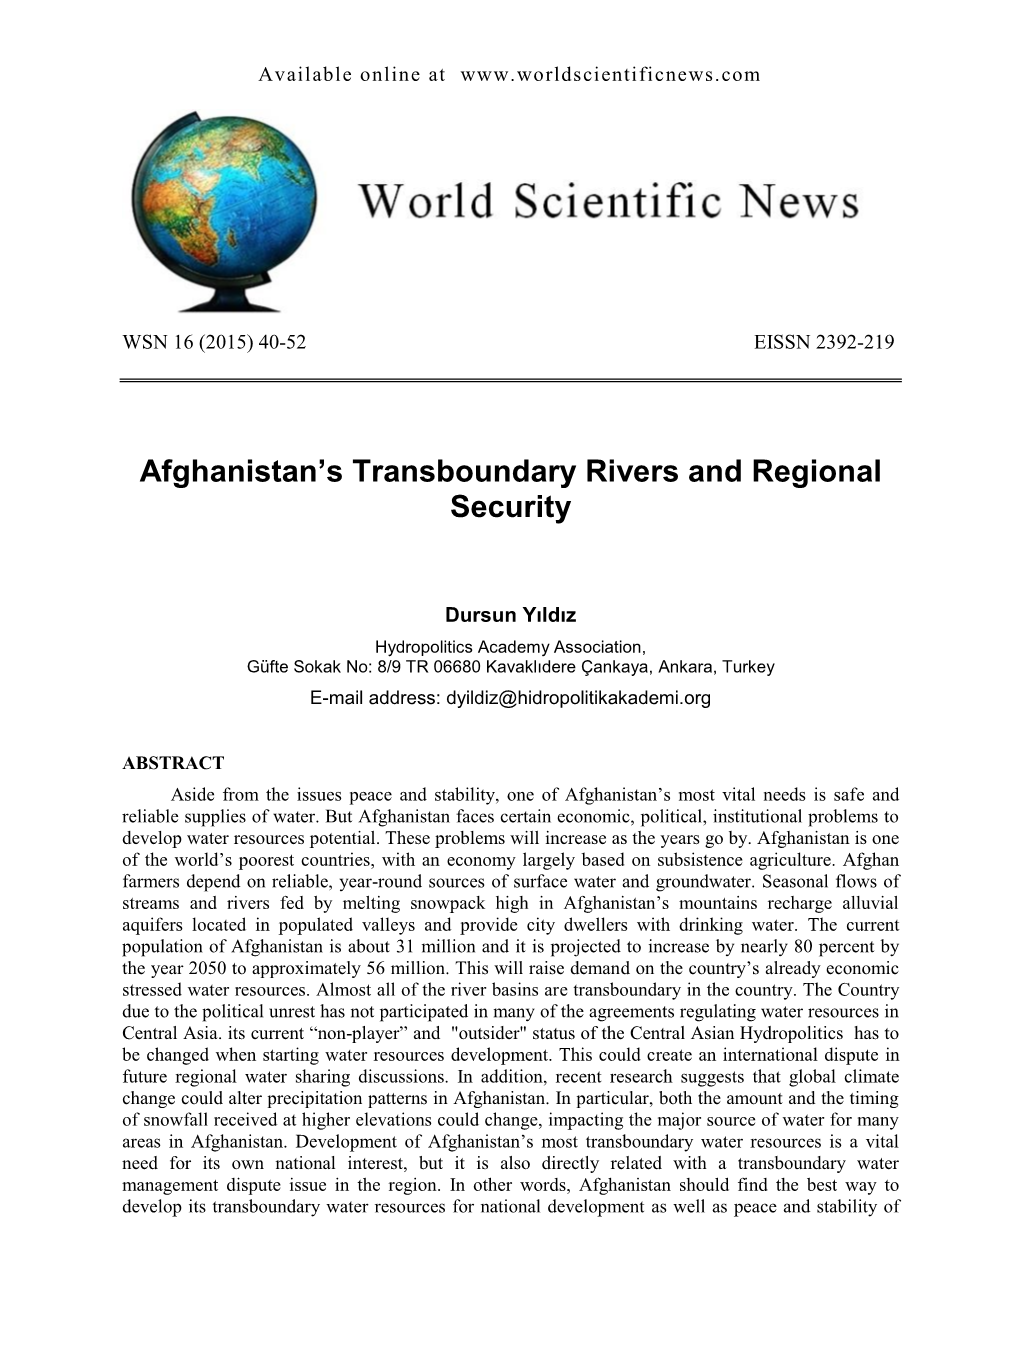 Afghanistan's Transboundary Rivers and Regional Security